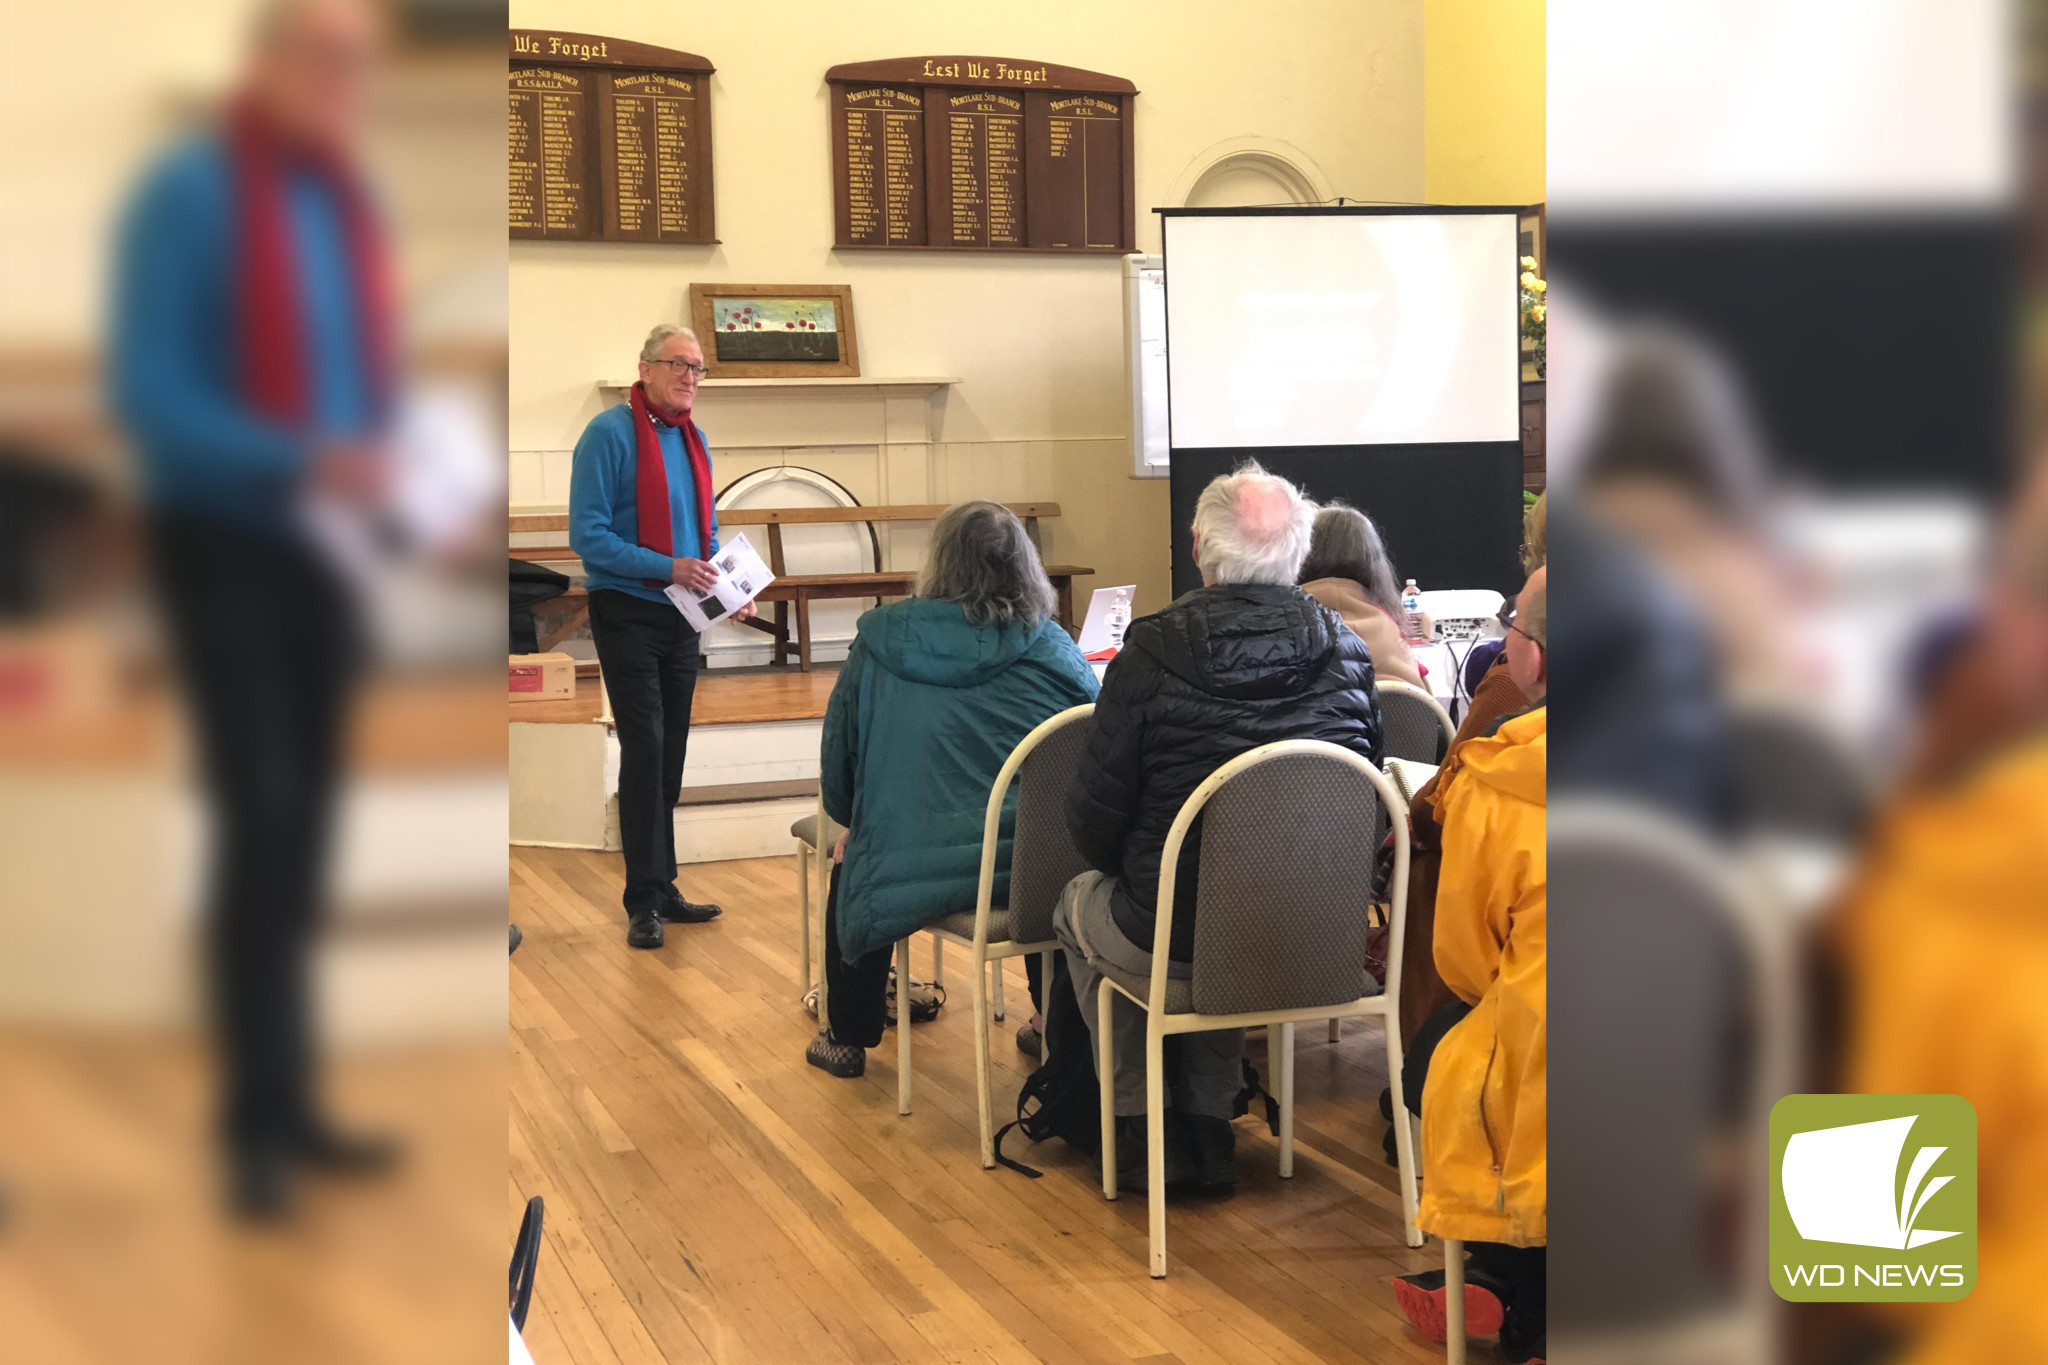 Seminar held: Dr Richard Broom was among the speakers at a seminar in Mortlake over the weekend which explored the history of the region.